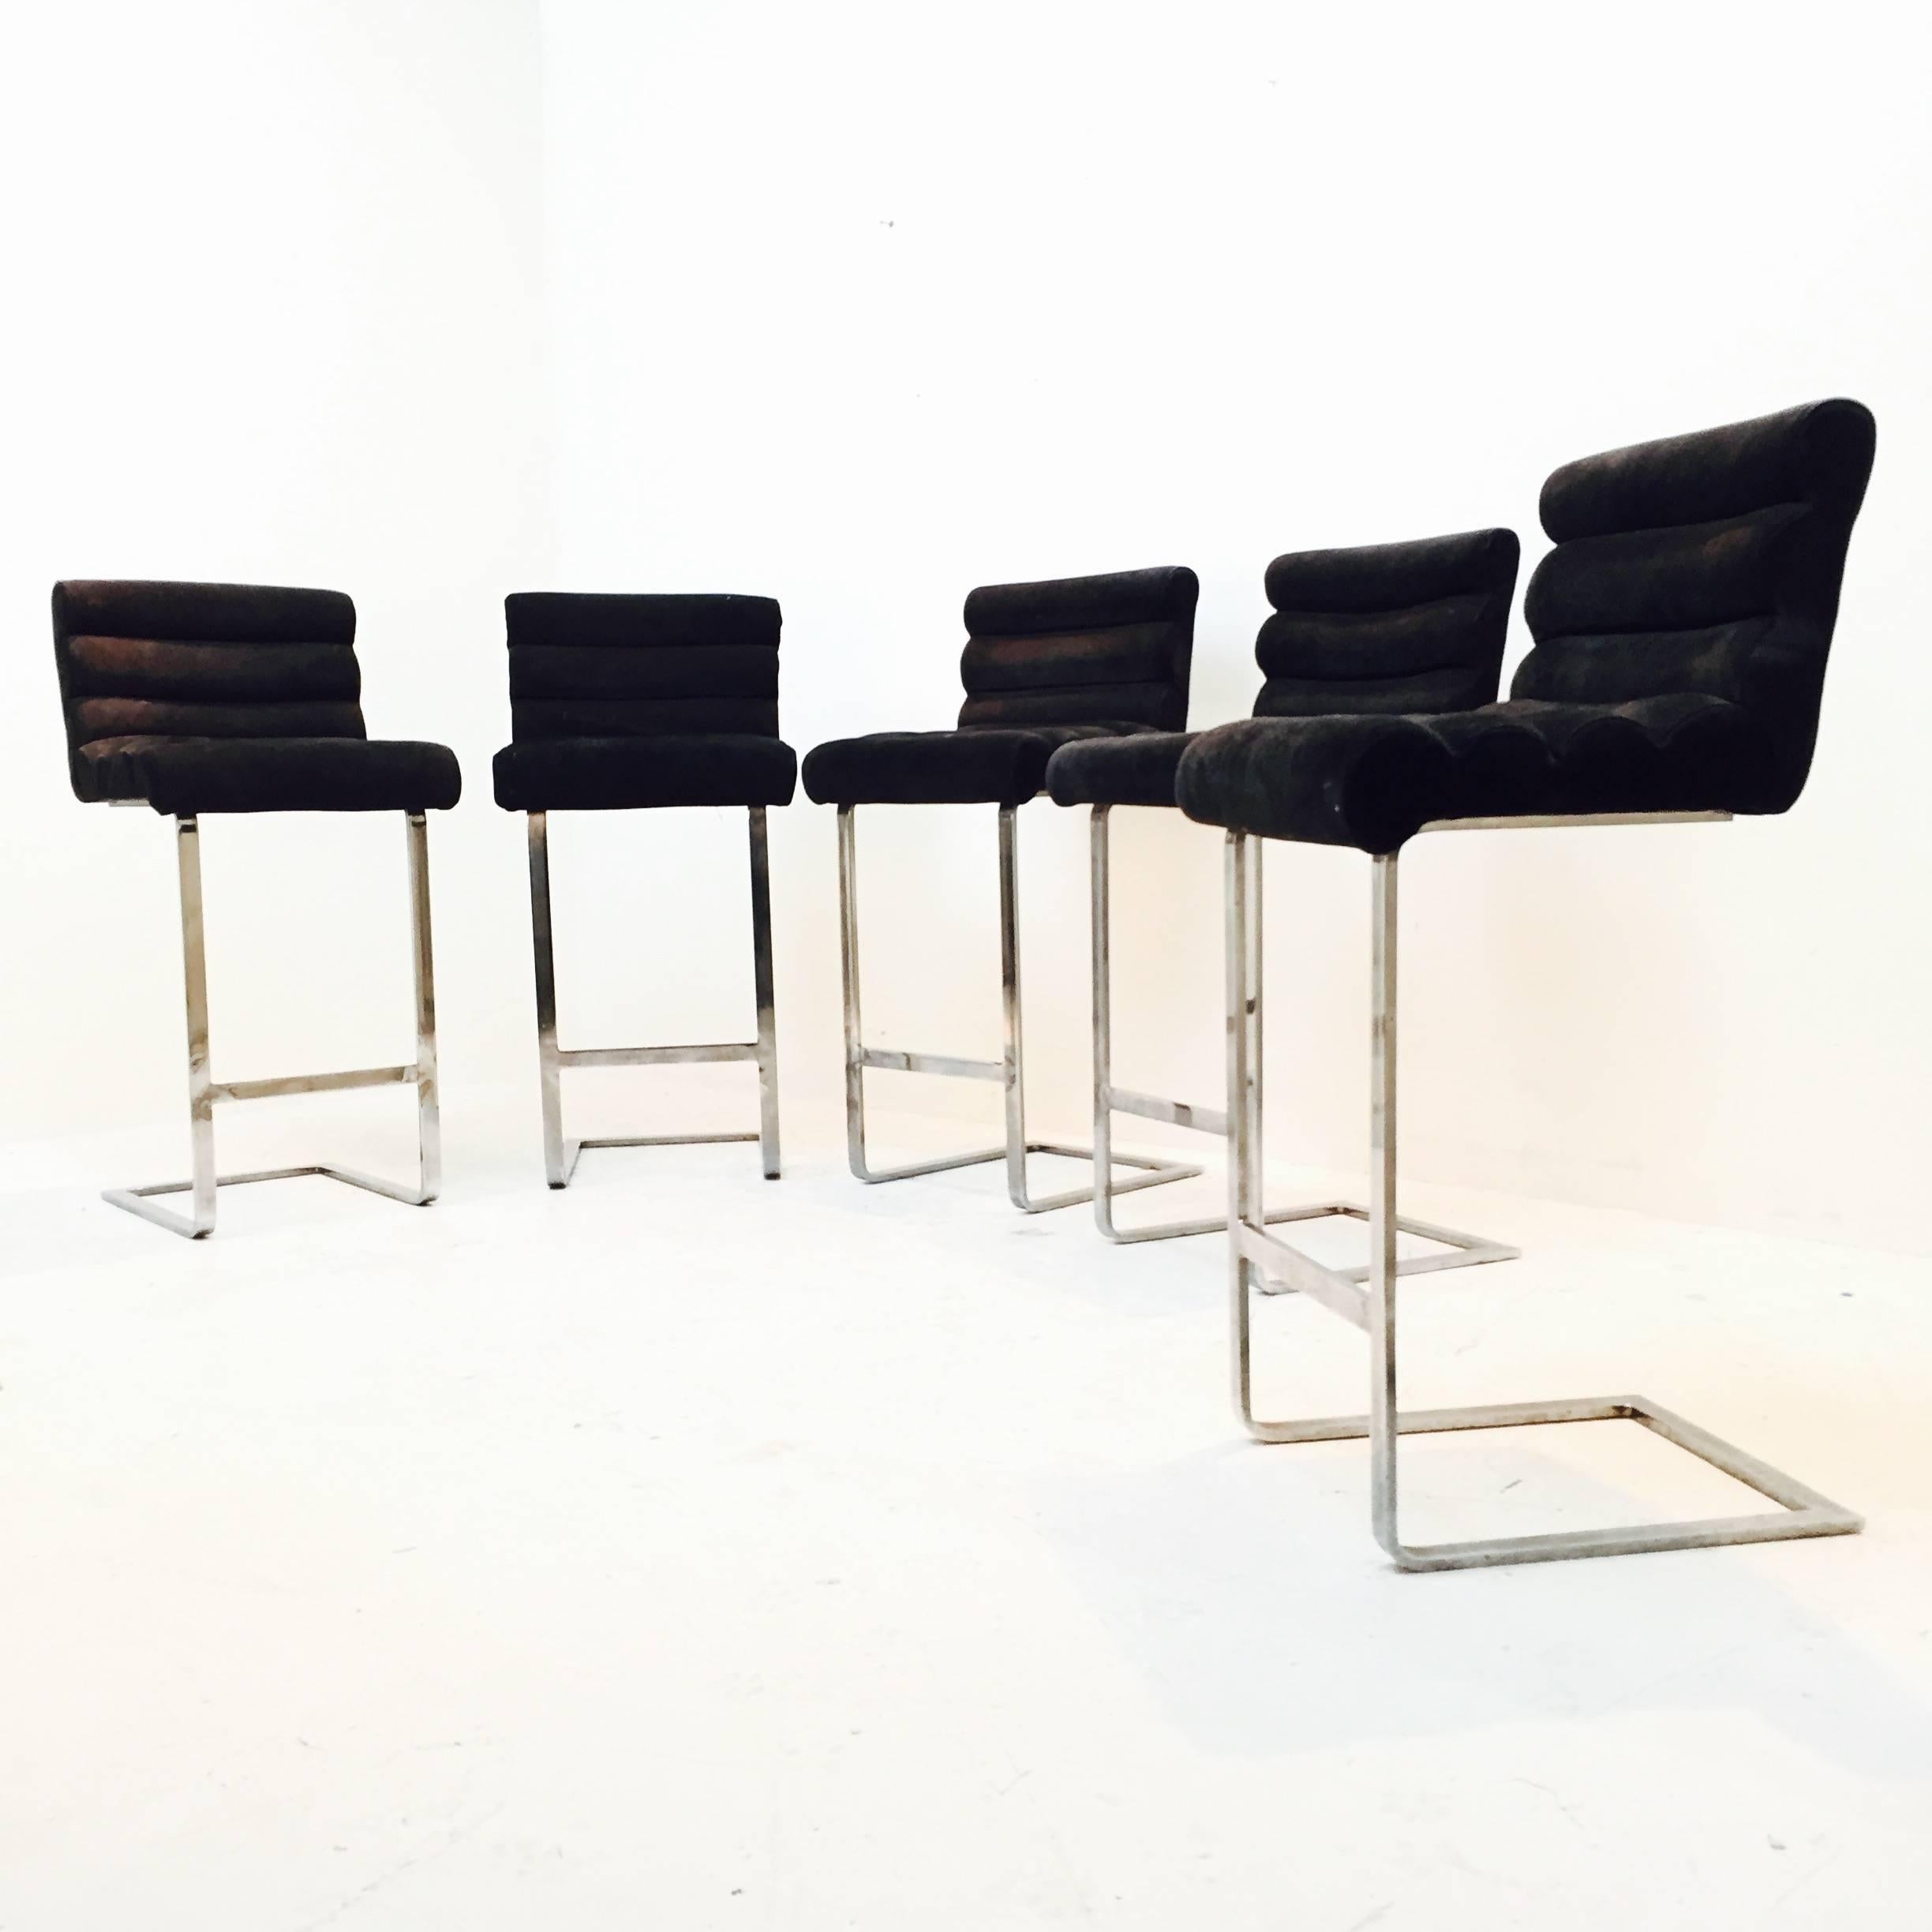 Late 20th Century Set of Five Chrome Cantilever Barstools